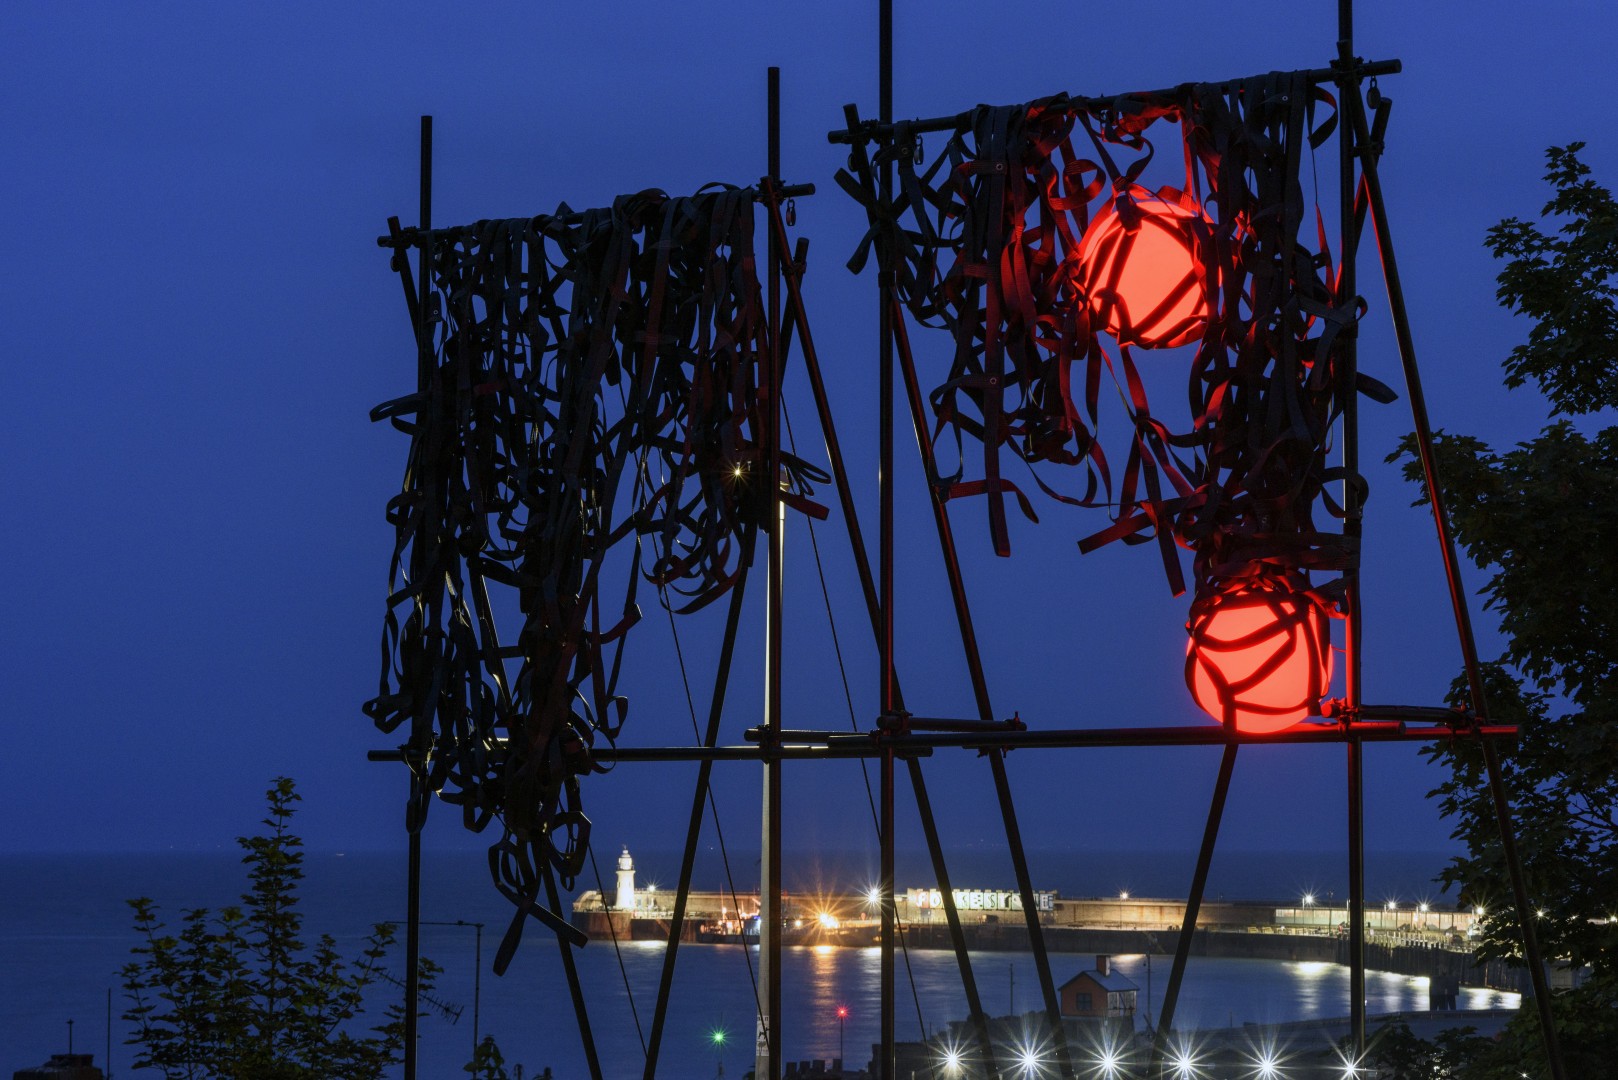 On the Circulation of Blood at Folkestone Triennial